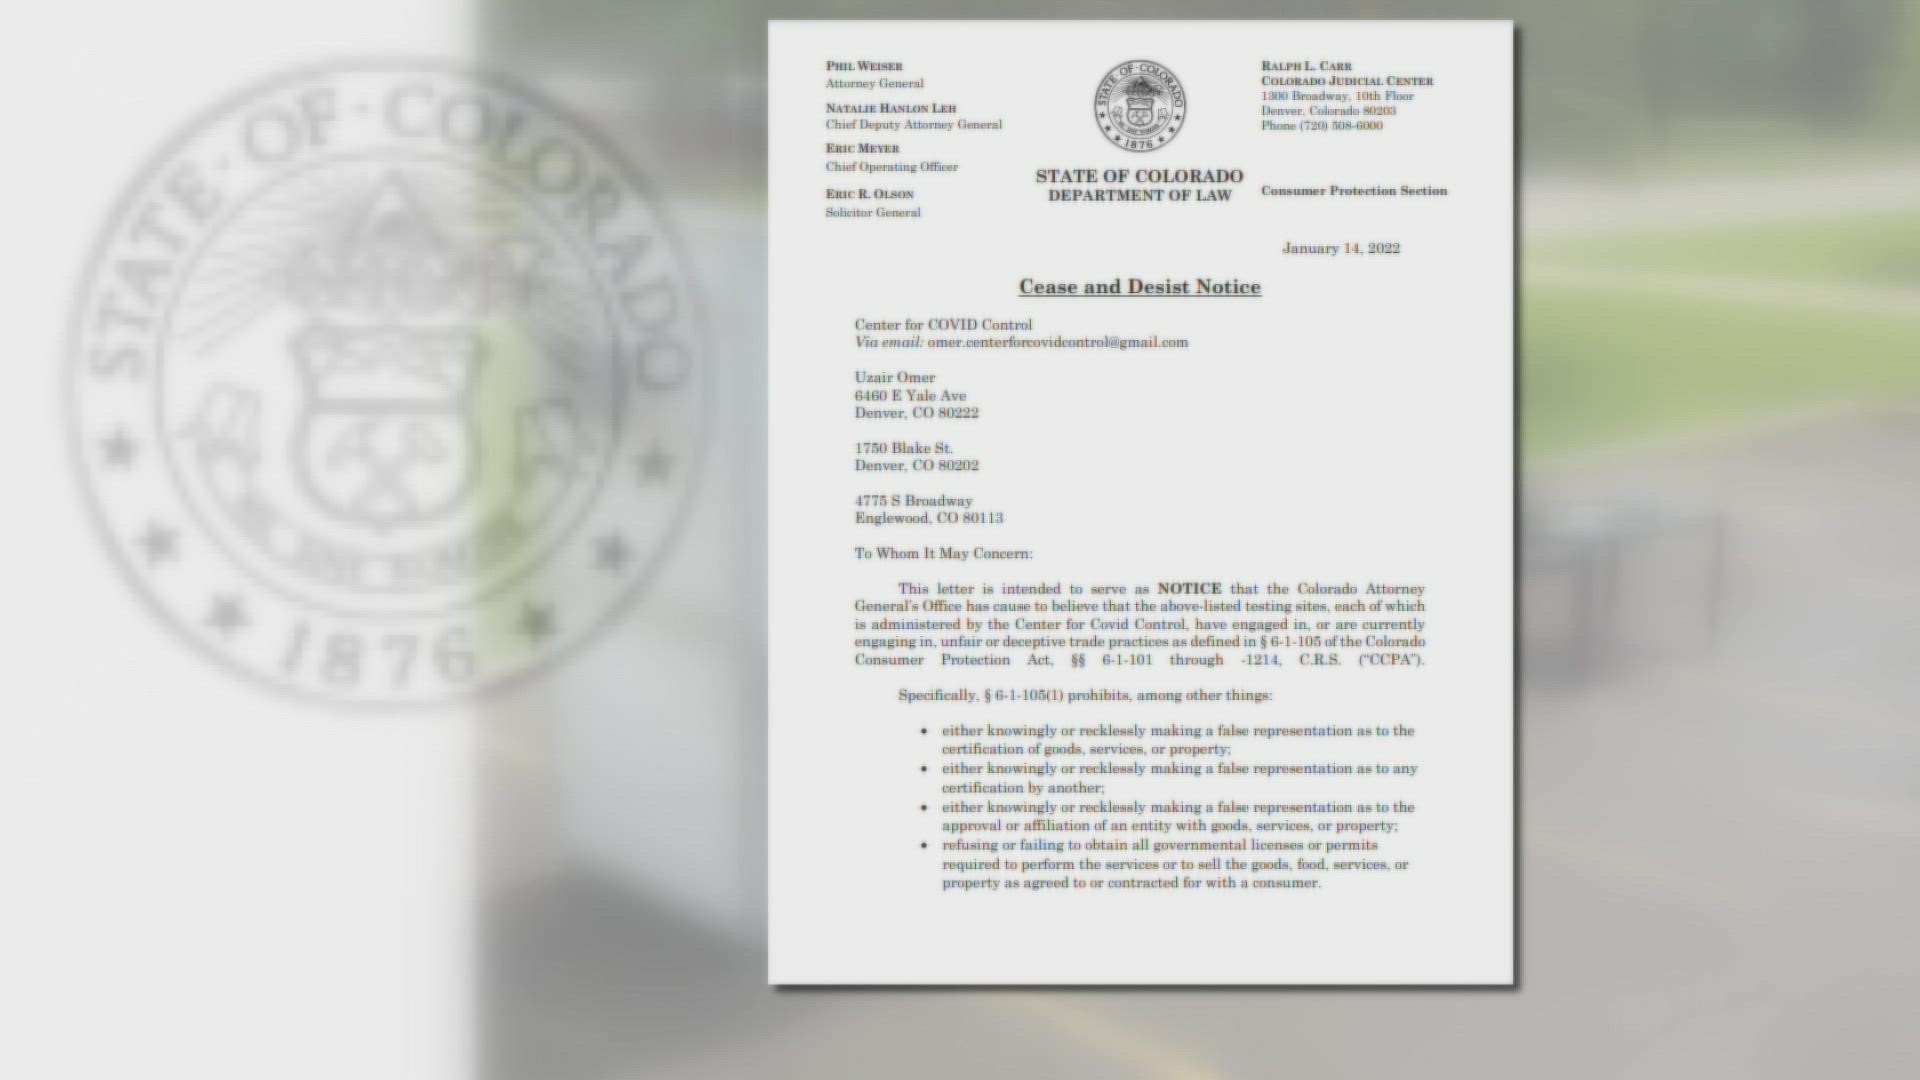 One of the companies, Center for COVID Control, does not have the necessary certifications to perform tests, the Attorney General's office said.